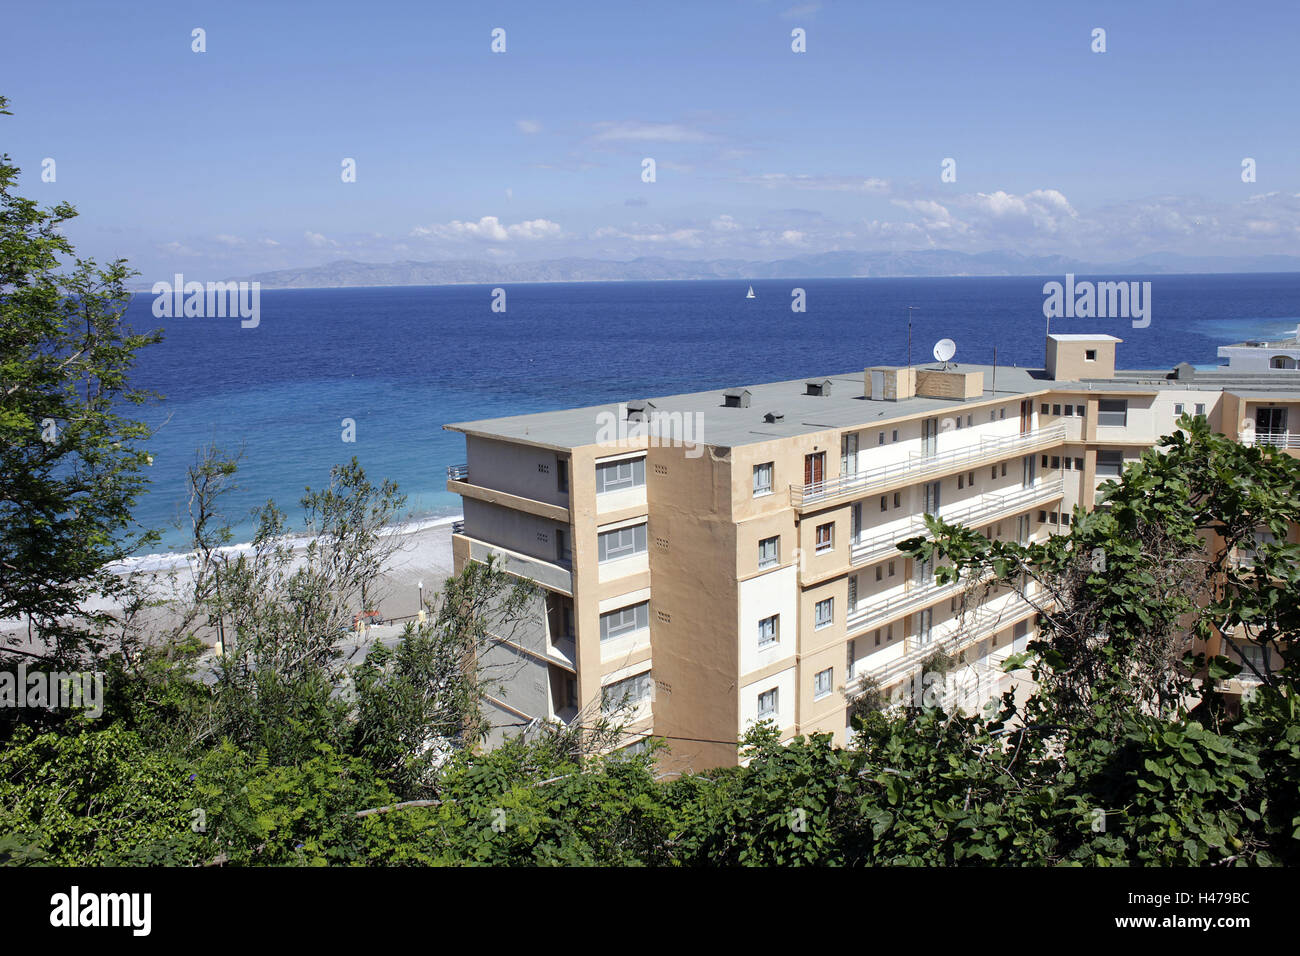 Greece, Rhodes, sea, mountains, hotel buildings, sunshine, water, clouds, Stock Photo